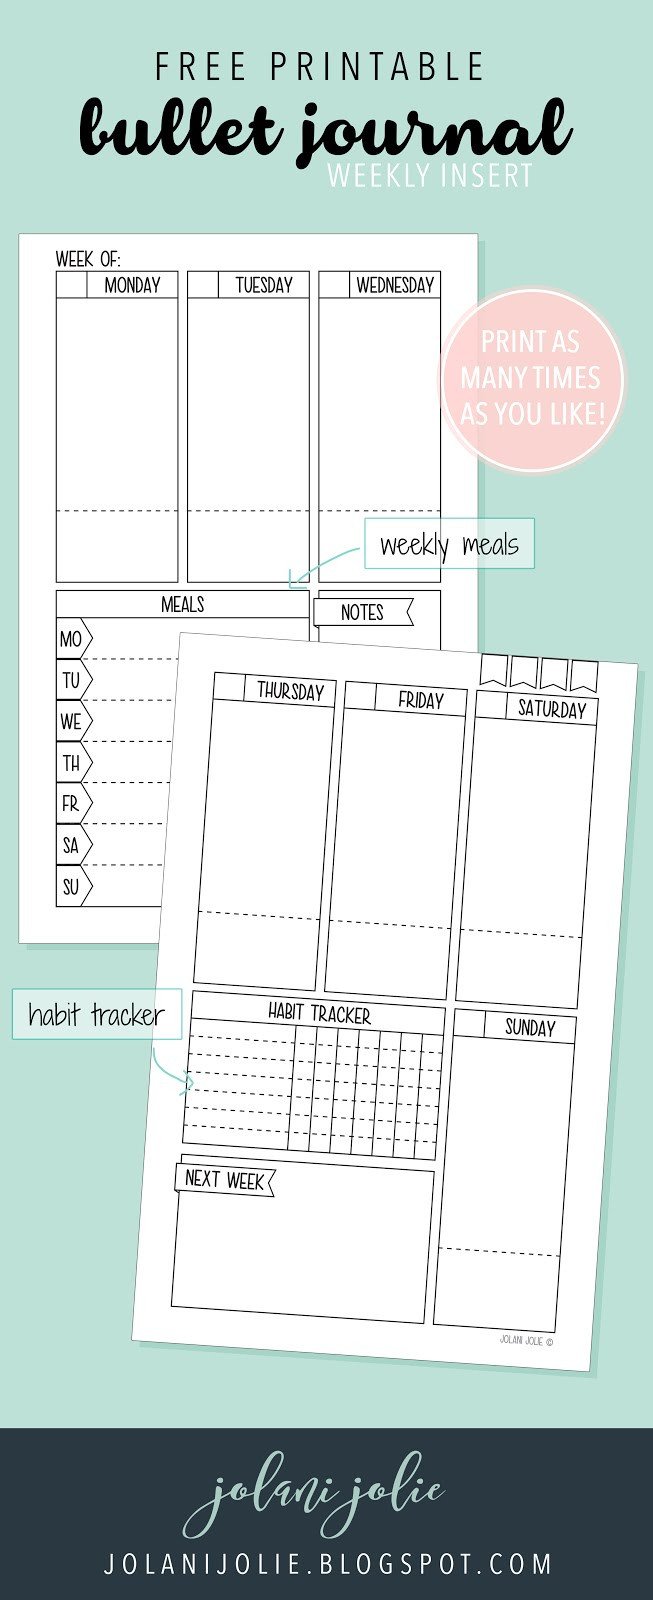 Bullet Journal Free Printables Free Printable Bullet Journal On Two Pages Jolani Jolie